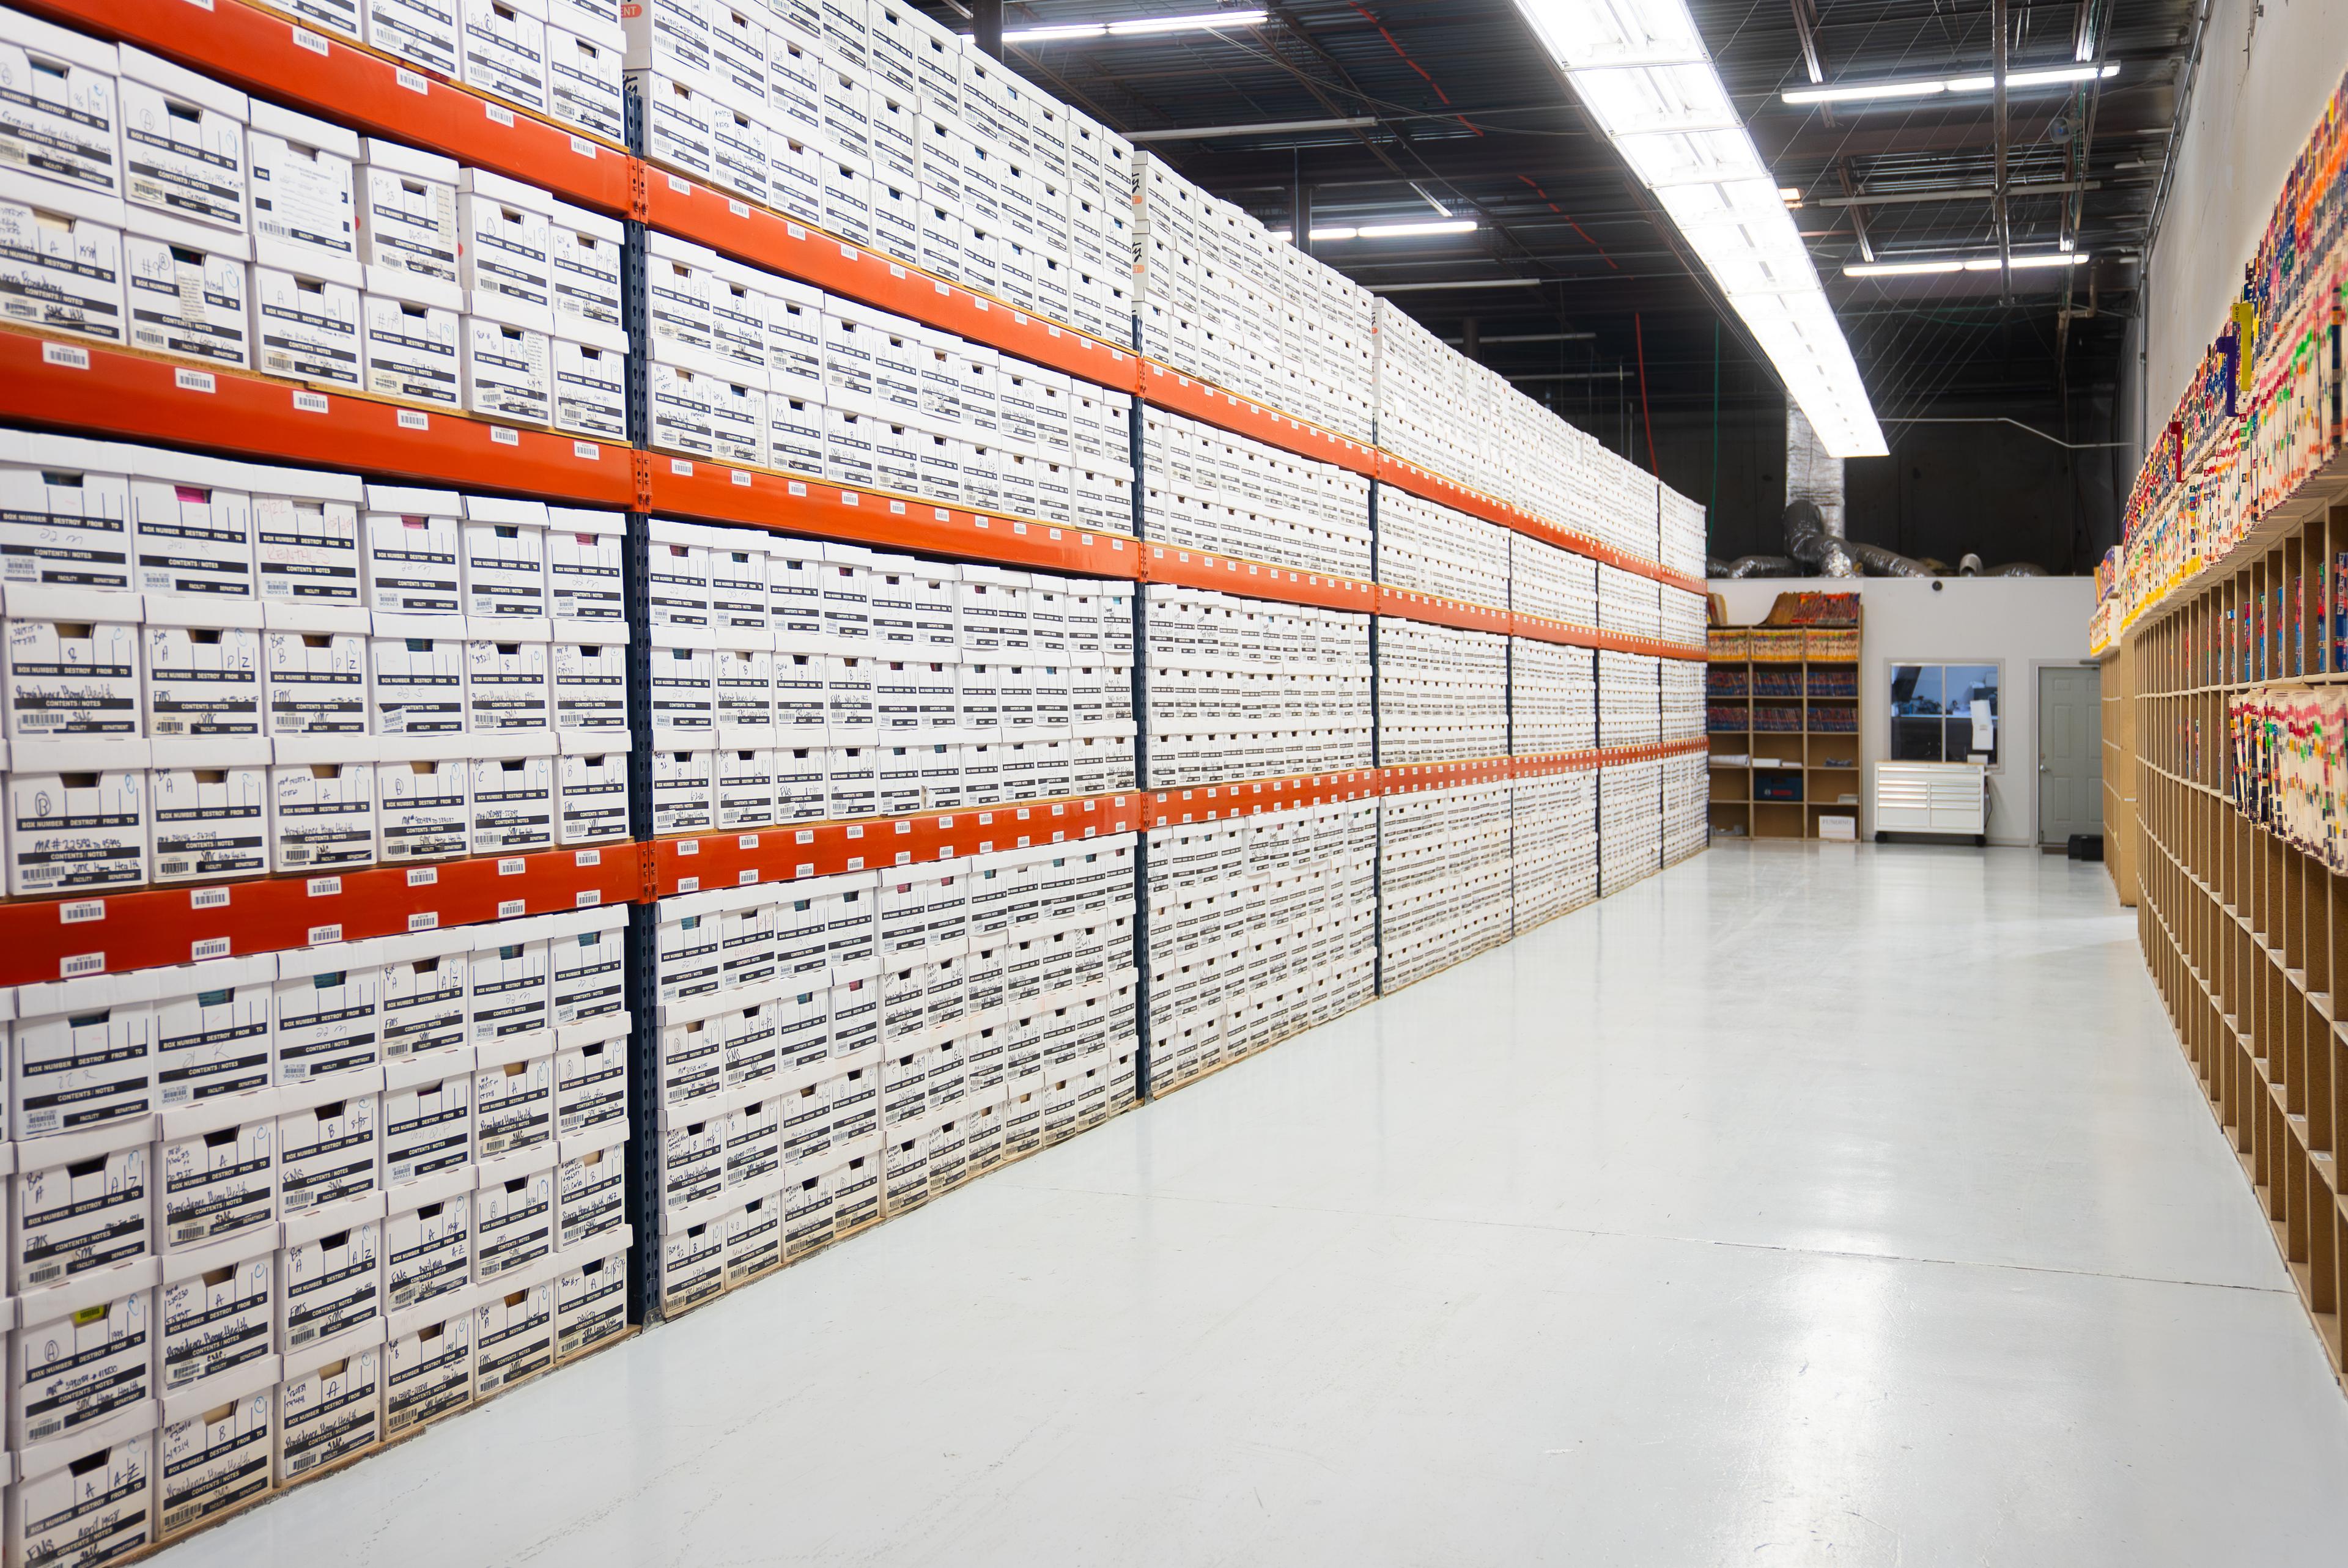 A record center aisle filled with shelves of neatly stacked archive boxes on one side, and shelves of file folders on the other side.


